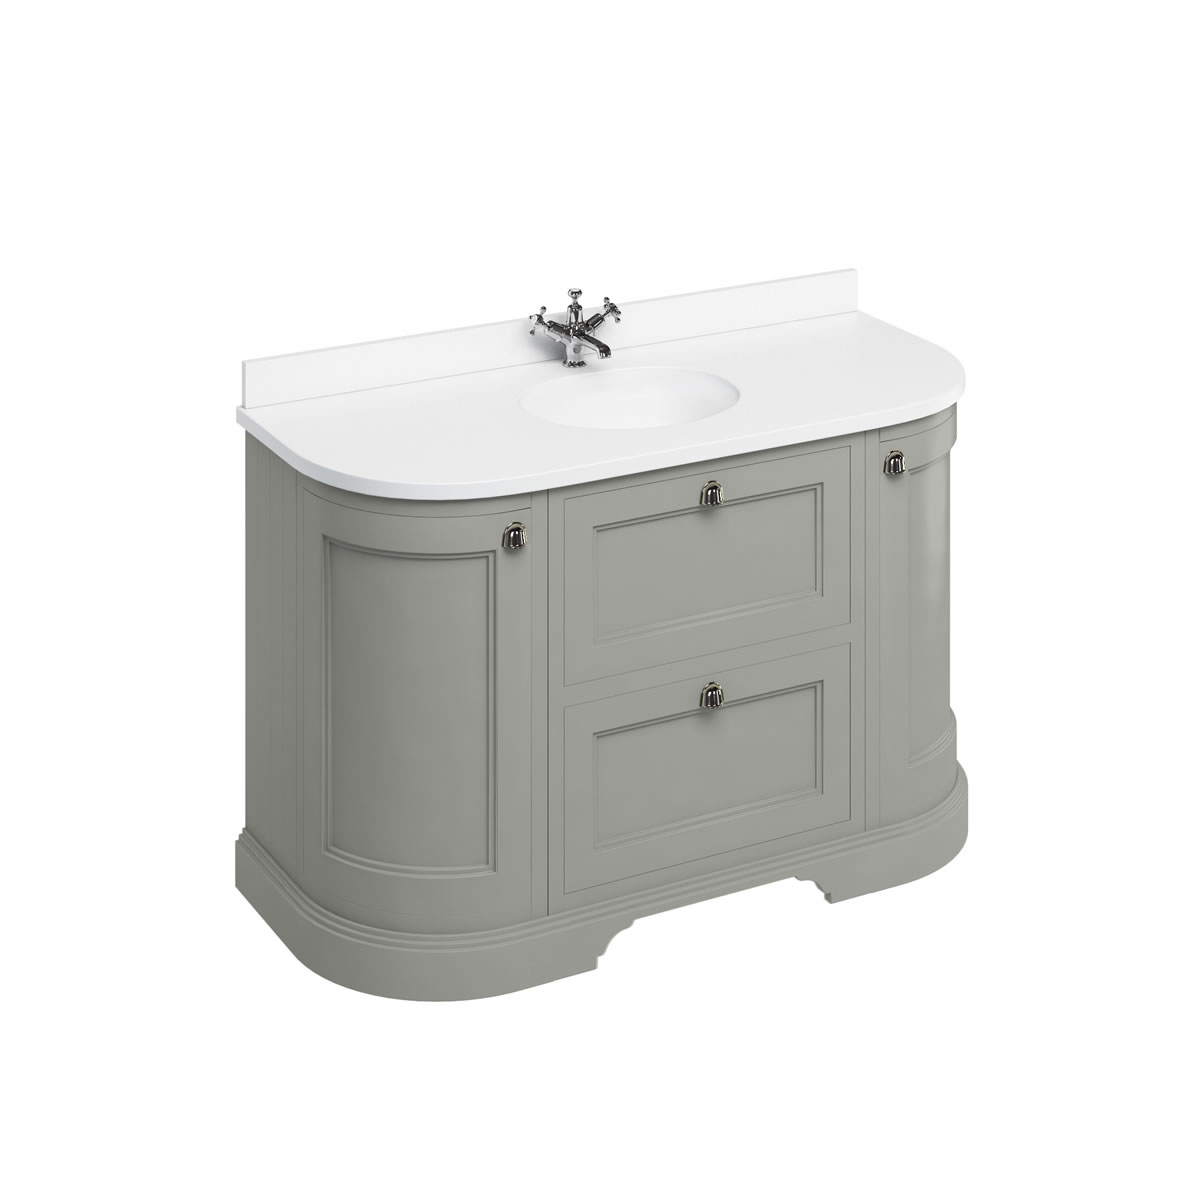 Freestanding 134 Curved Vanity Unit with drawers - Dark Olive and Minerva white worktop with integrated white basin